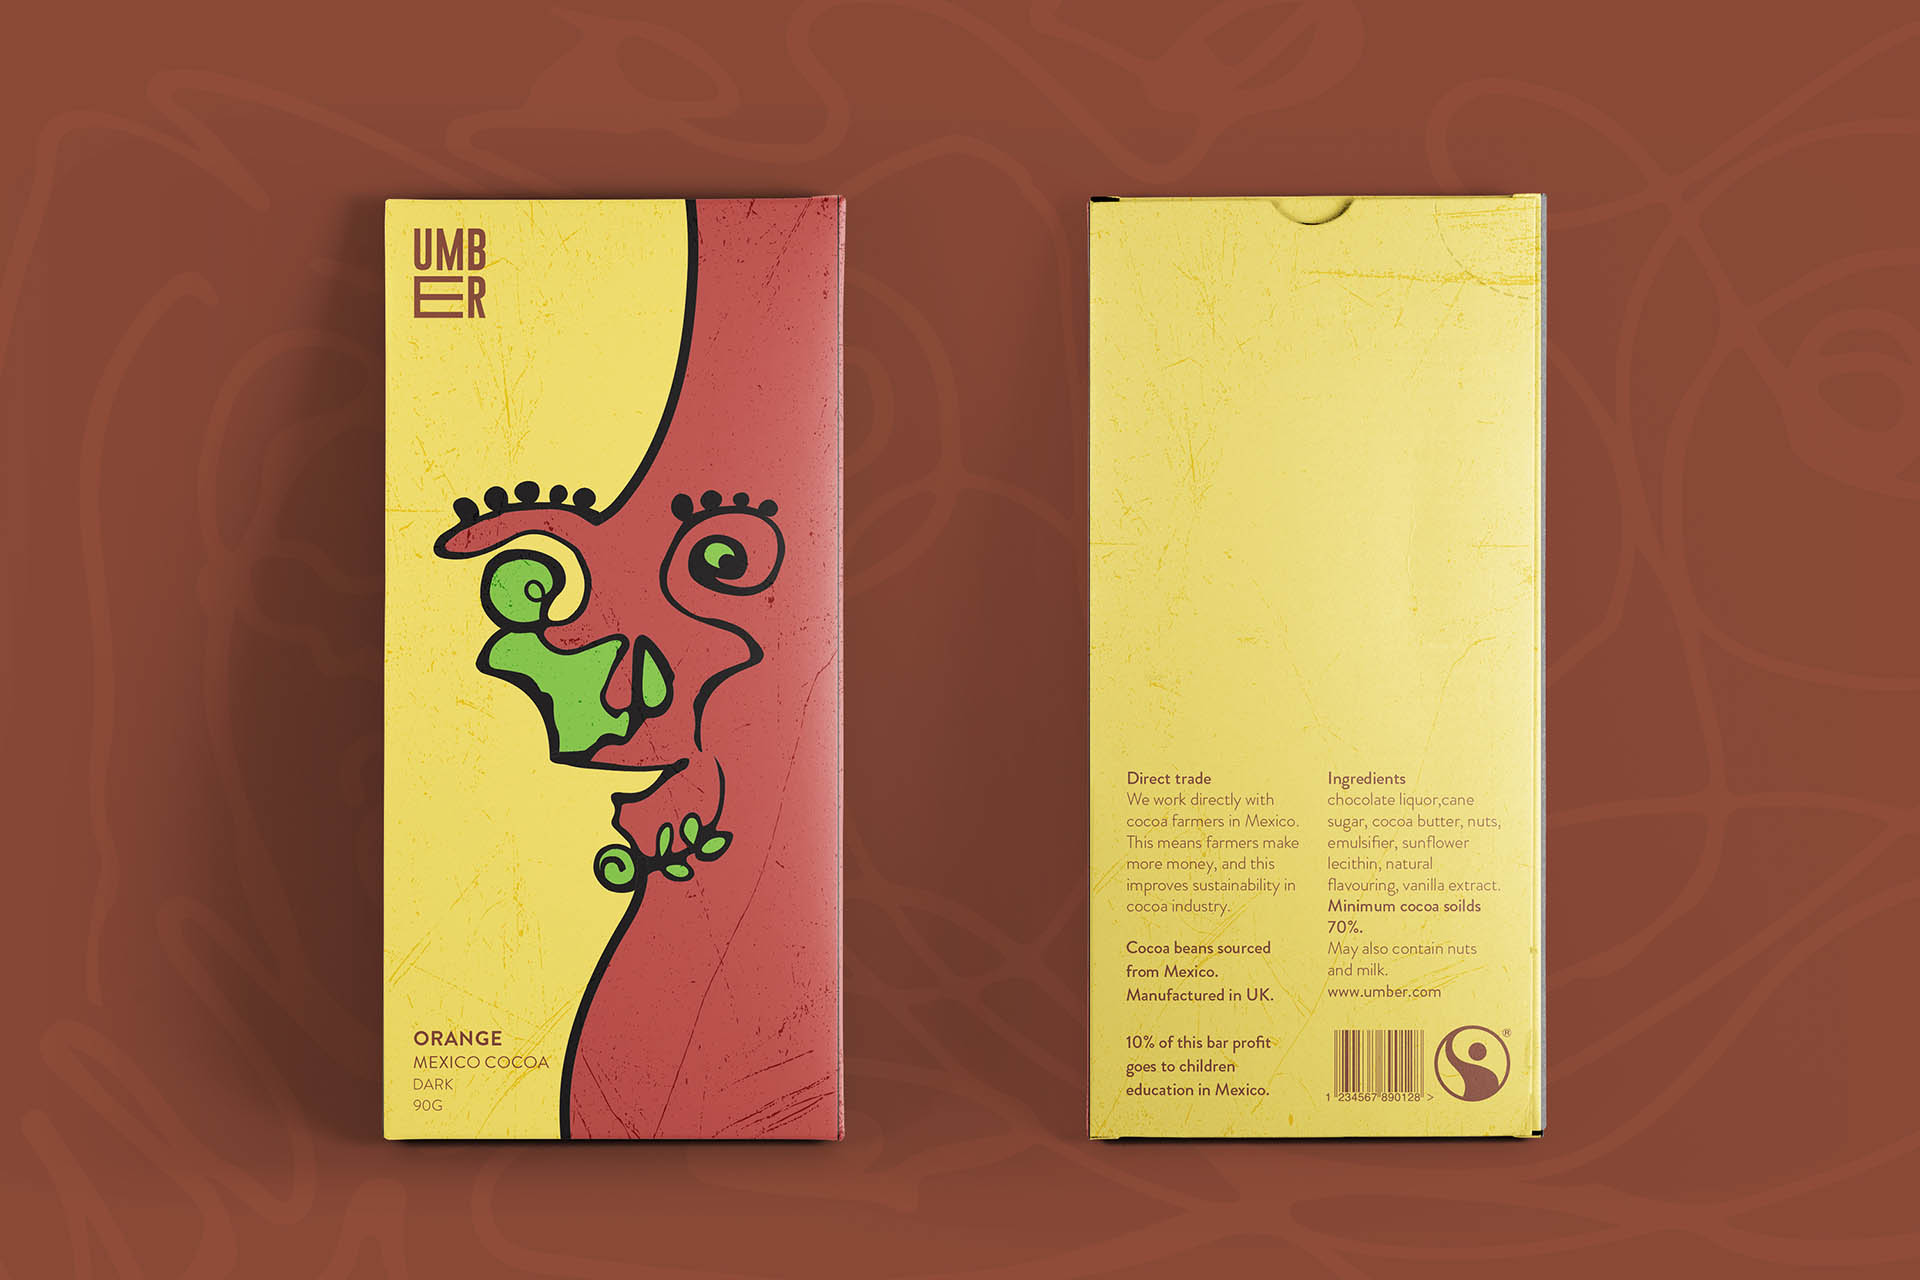 Visual identity and packaging for Umber a chocolate brand working with cocoa farmers to improve their income and sustainability